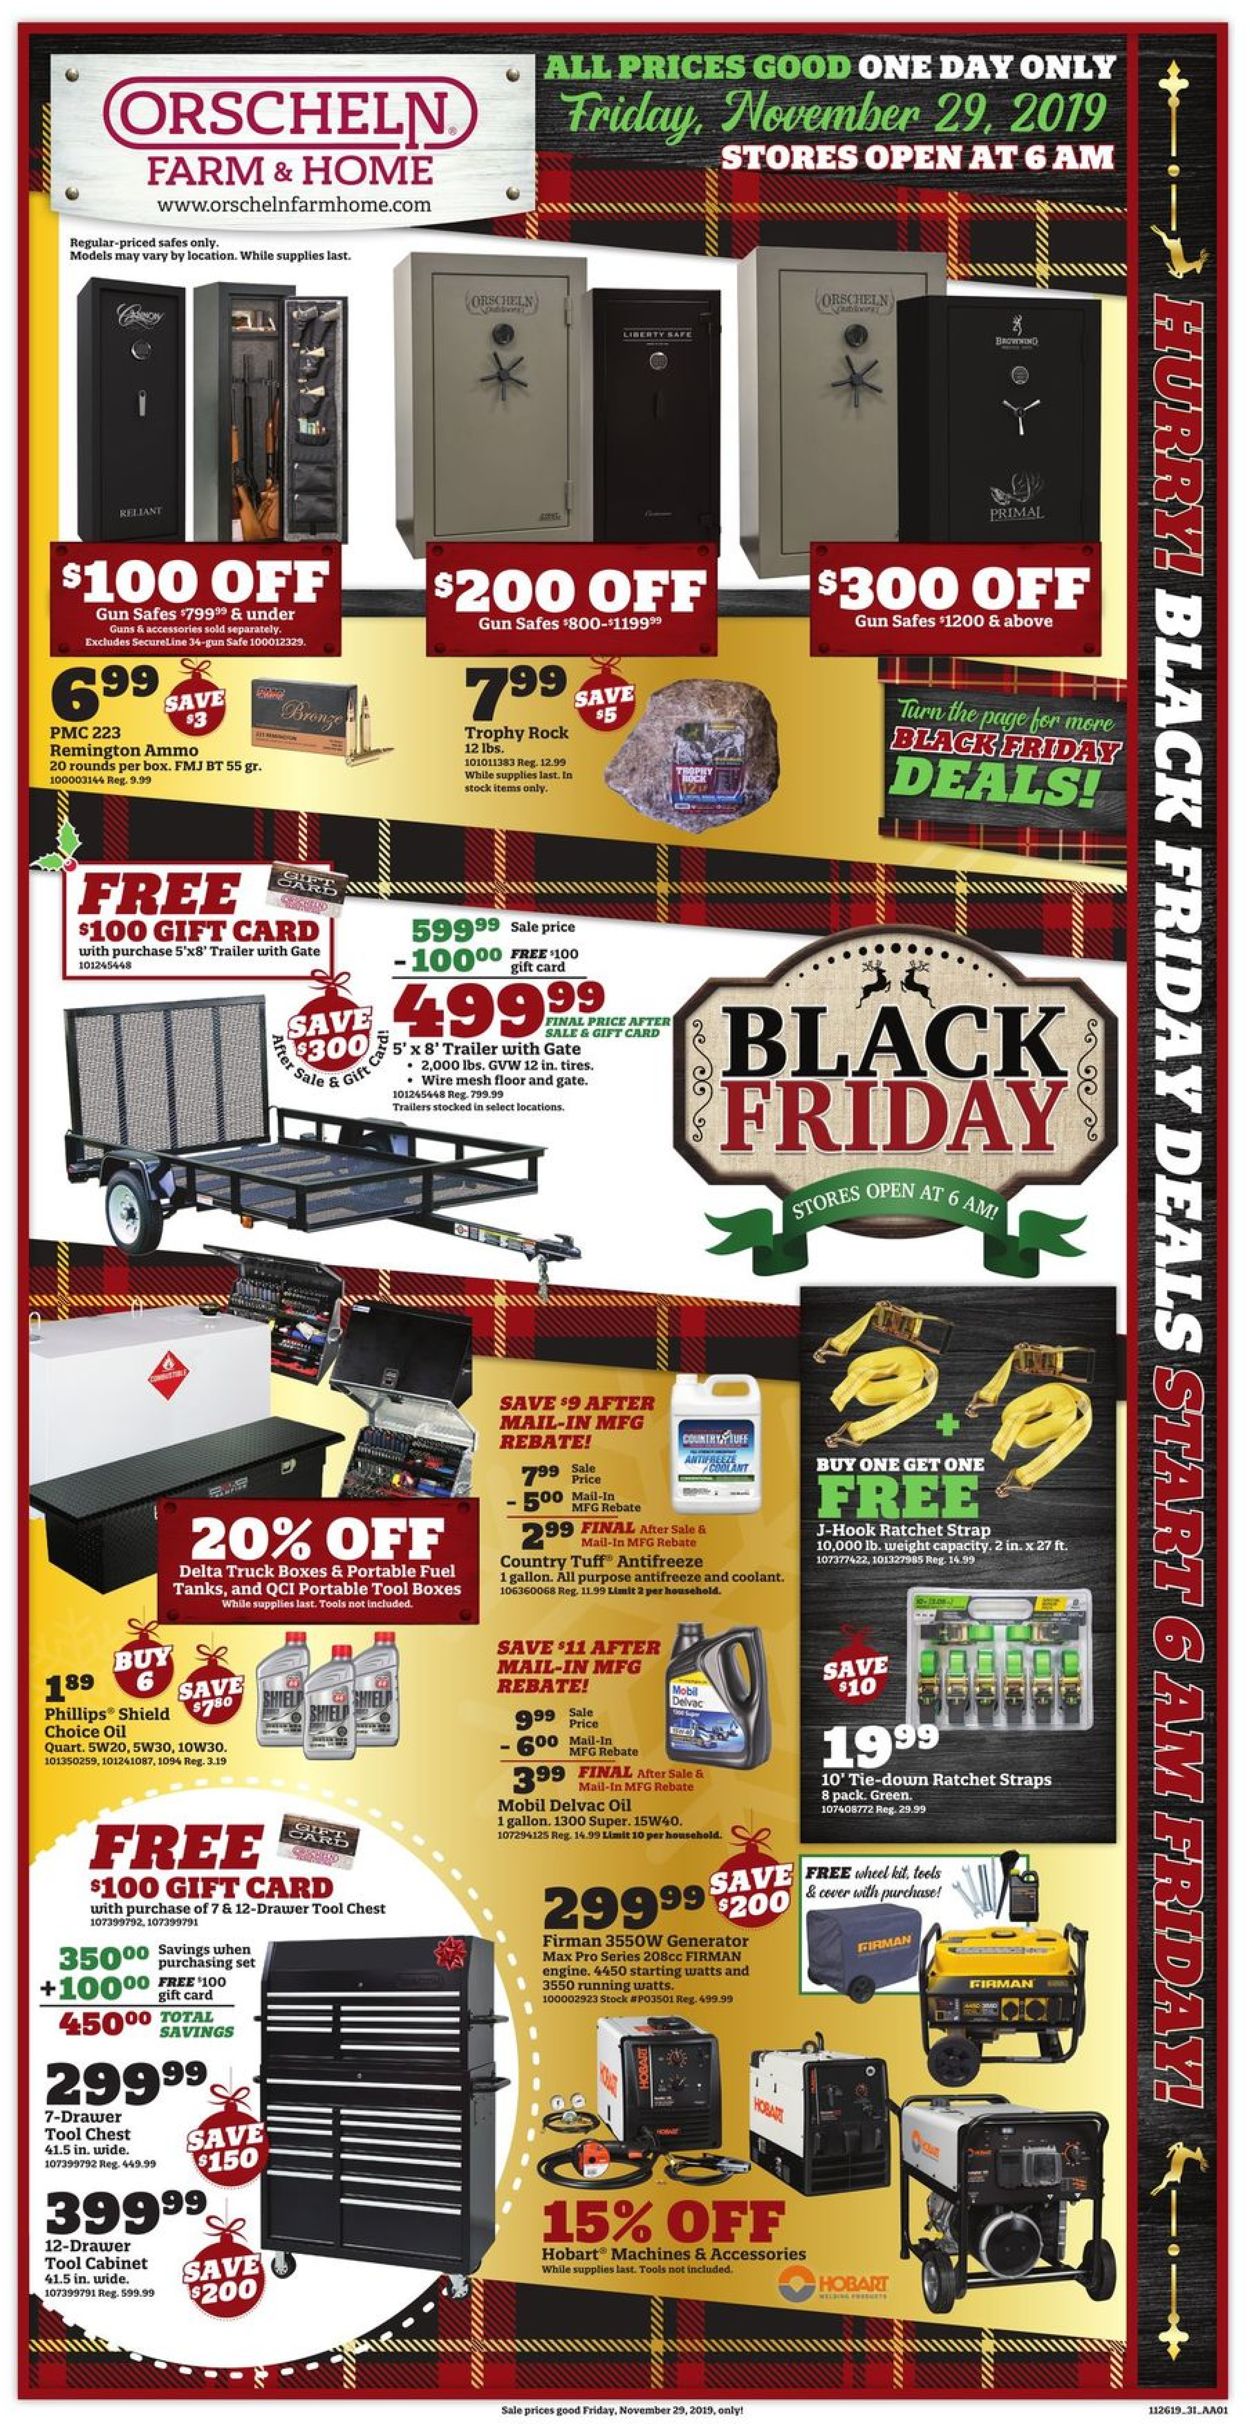 Orscheln Farm and Home - Black Friday Ad 2019 Weekly Ad Circular - valid 11/26-12/01/2019 (Page 3)